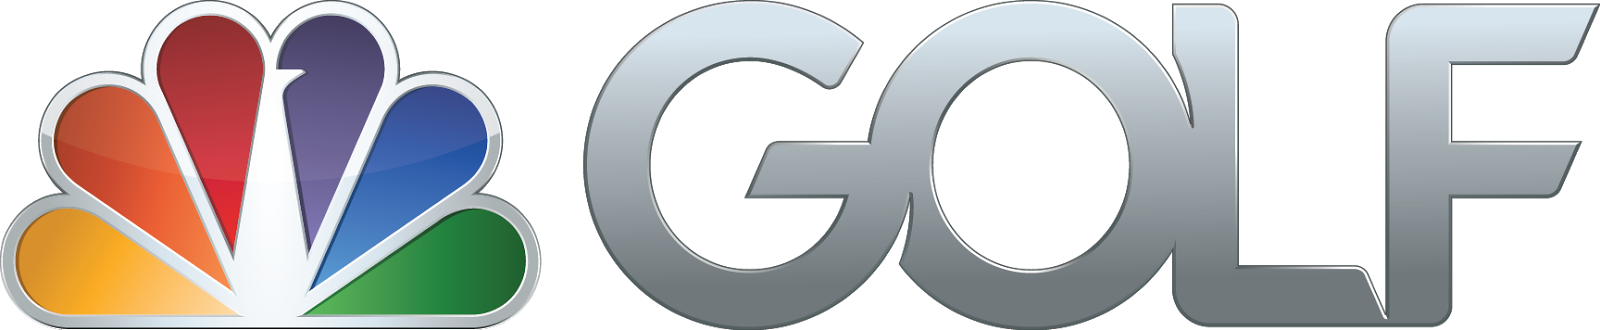 Golf Channel 2014 Logo.png